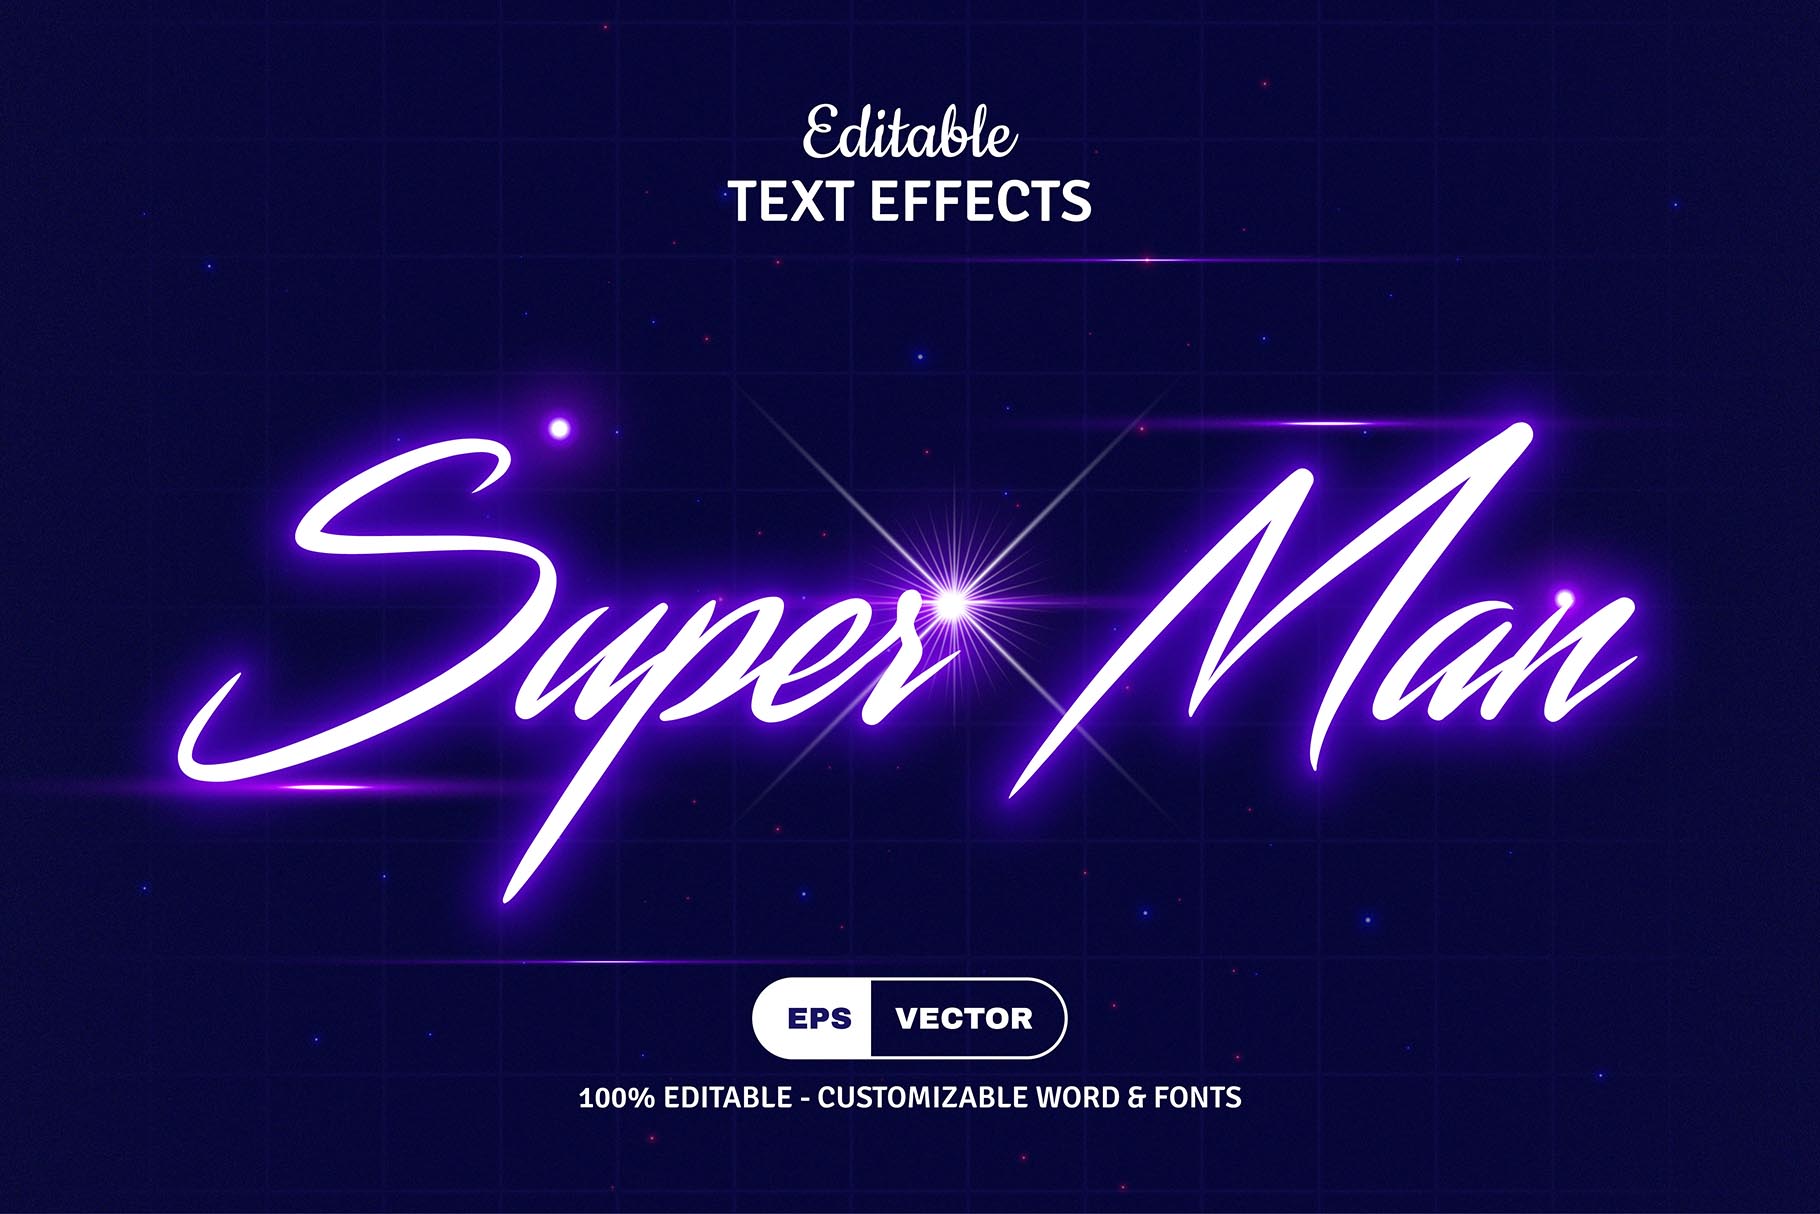 80s text effects 15 616